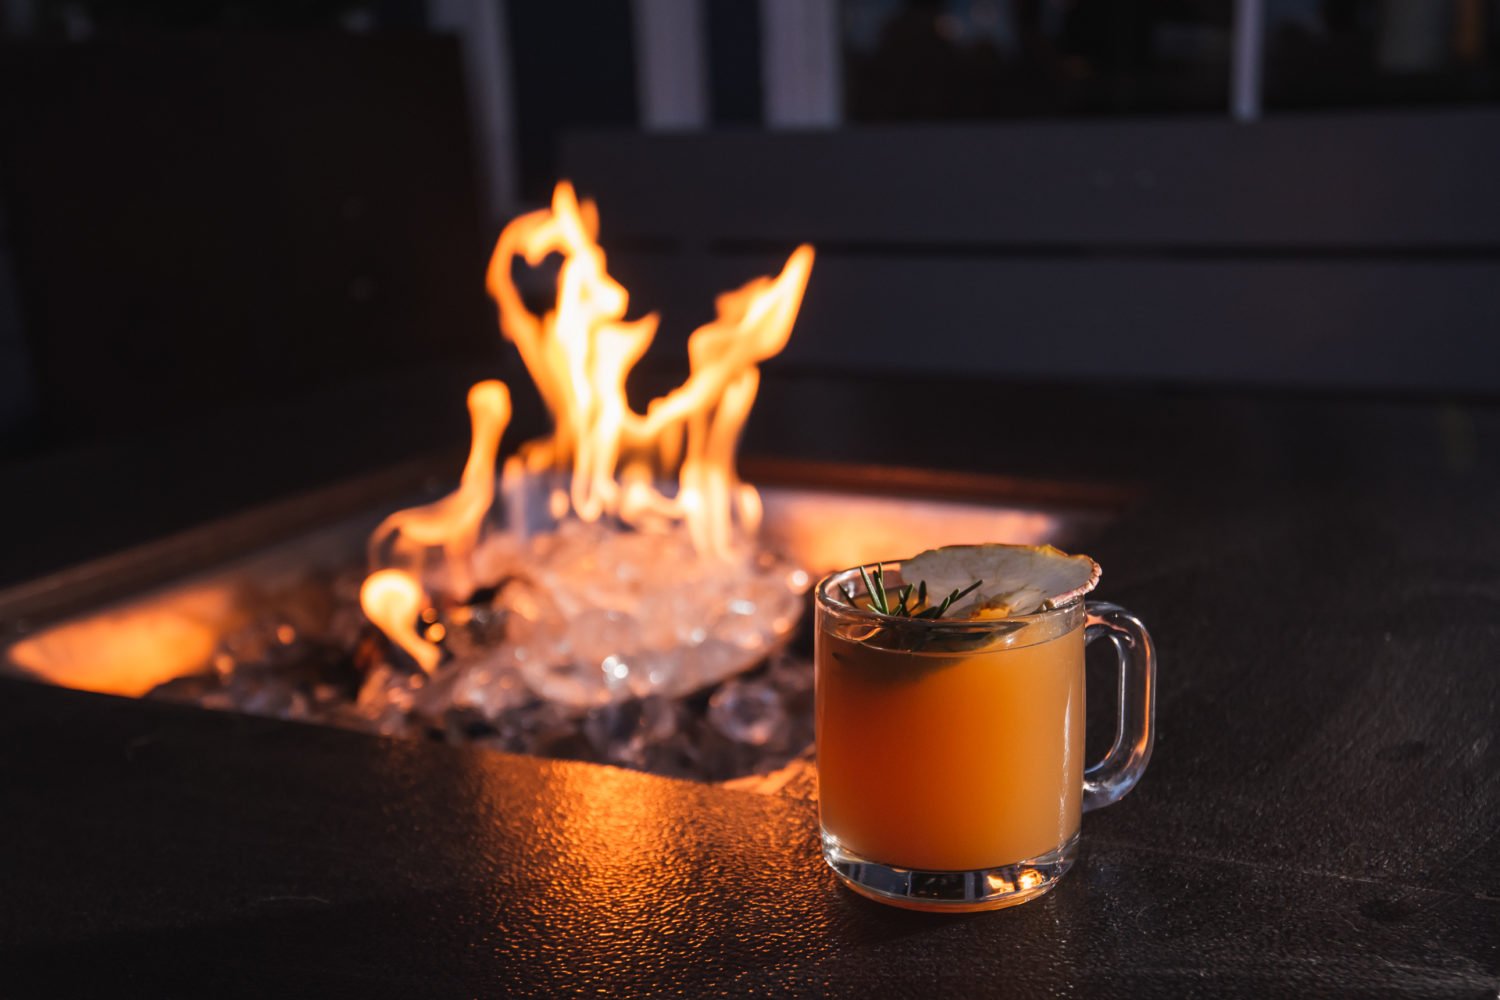 Warm up with a drink by the fire at the Salt Line. Photograph by Paul Kim.